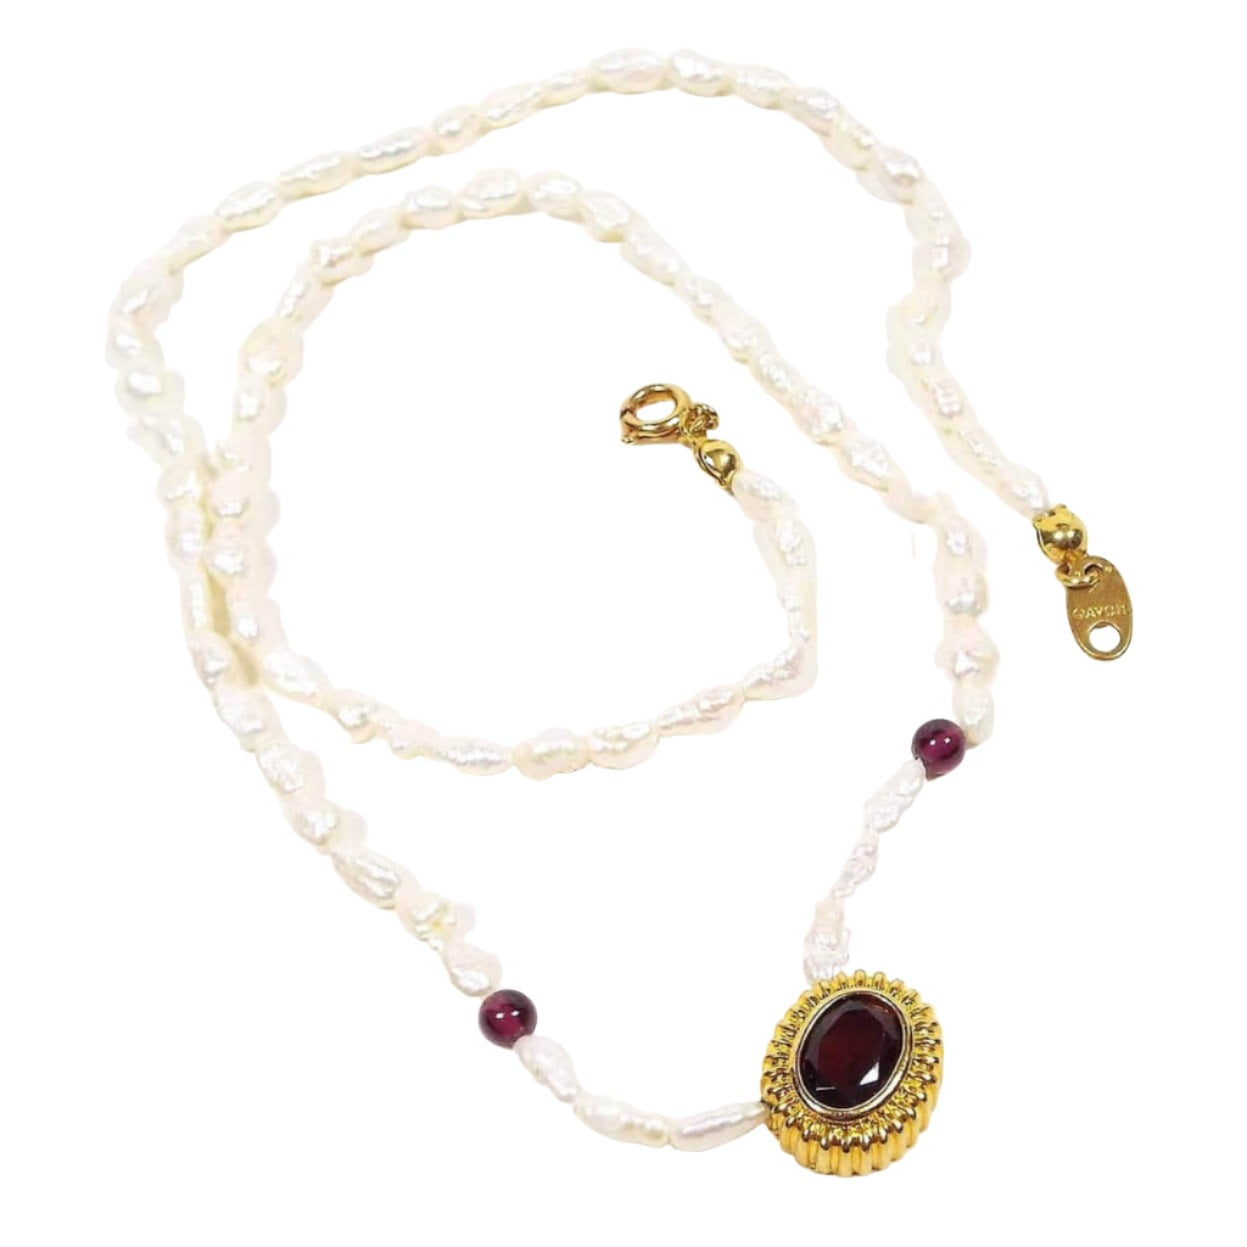 Top view of the retro vintage Avon garnet and freshwater cultured pearl beaded pendant necklace. The metal around the pendant and clasp is gold tone in color. The necklace is beaded with small rice pearls and two small round garnet beads. The bottom pendant has an oval garnet cab in the middle. 